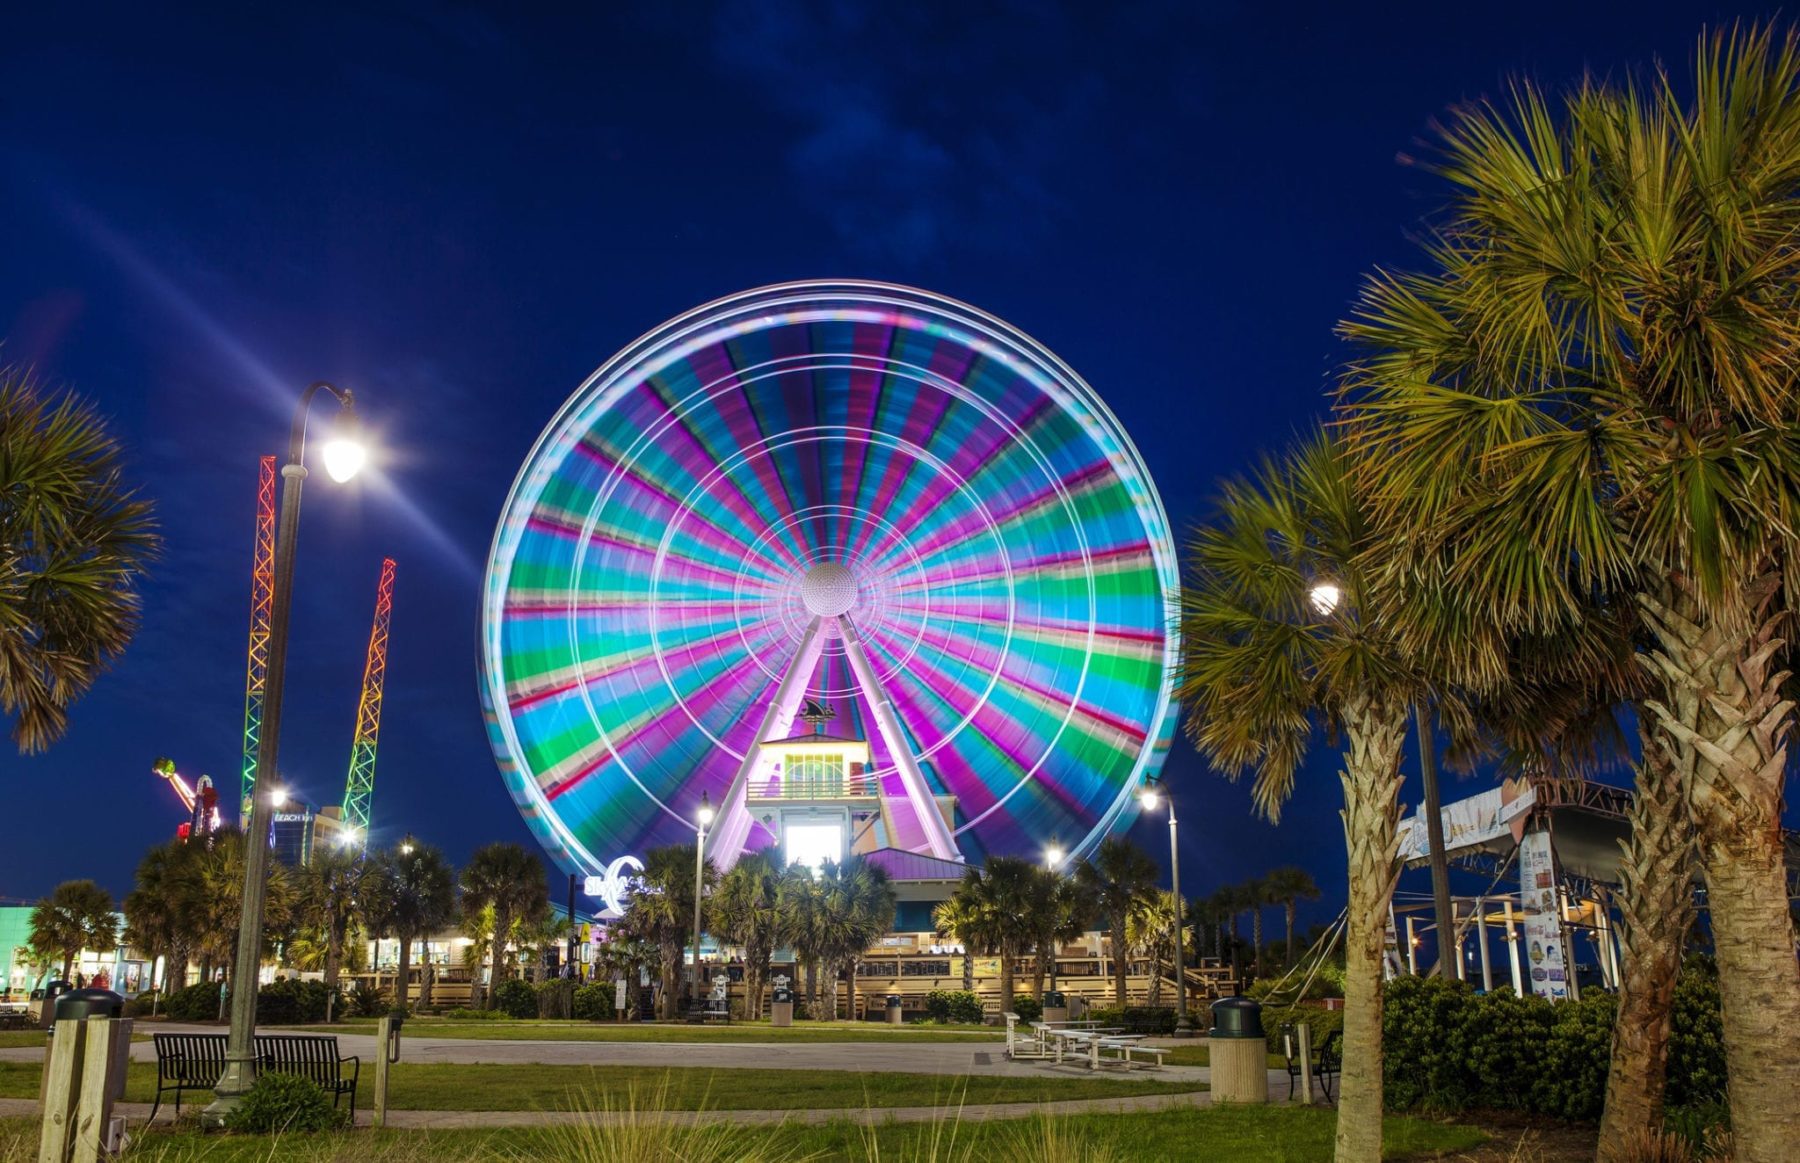 Top 12 Things To Do in Myrtle Beach at Night